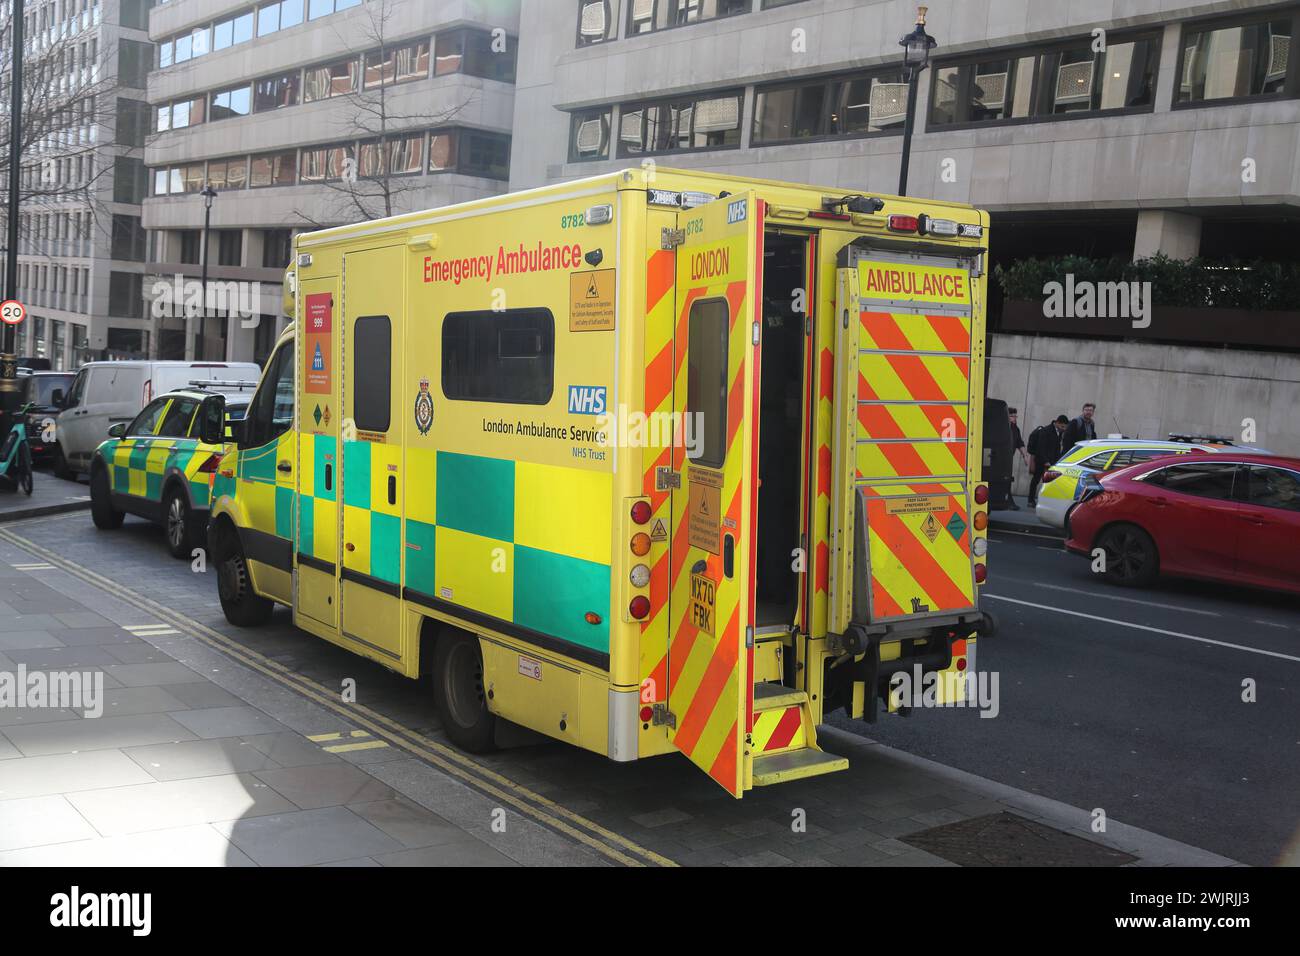 A London Ambulance vehicle attending an emergency in central London, UK Stock Photo